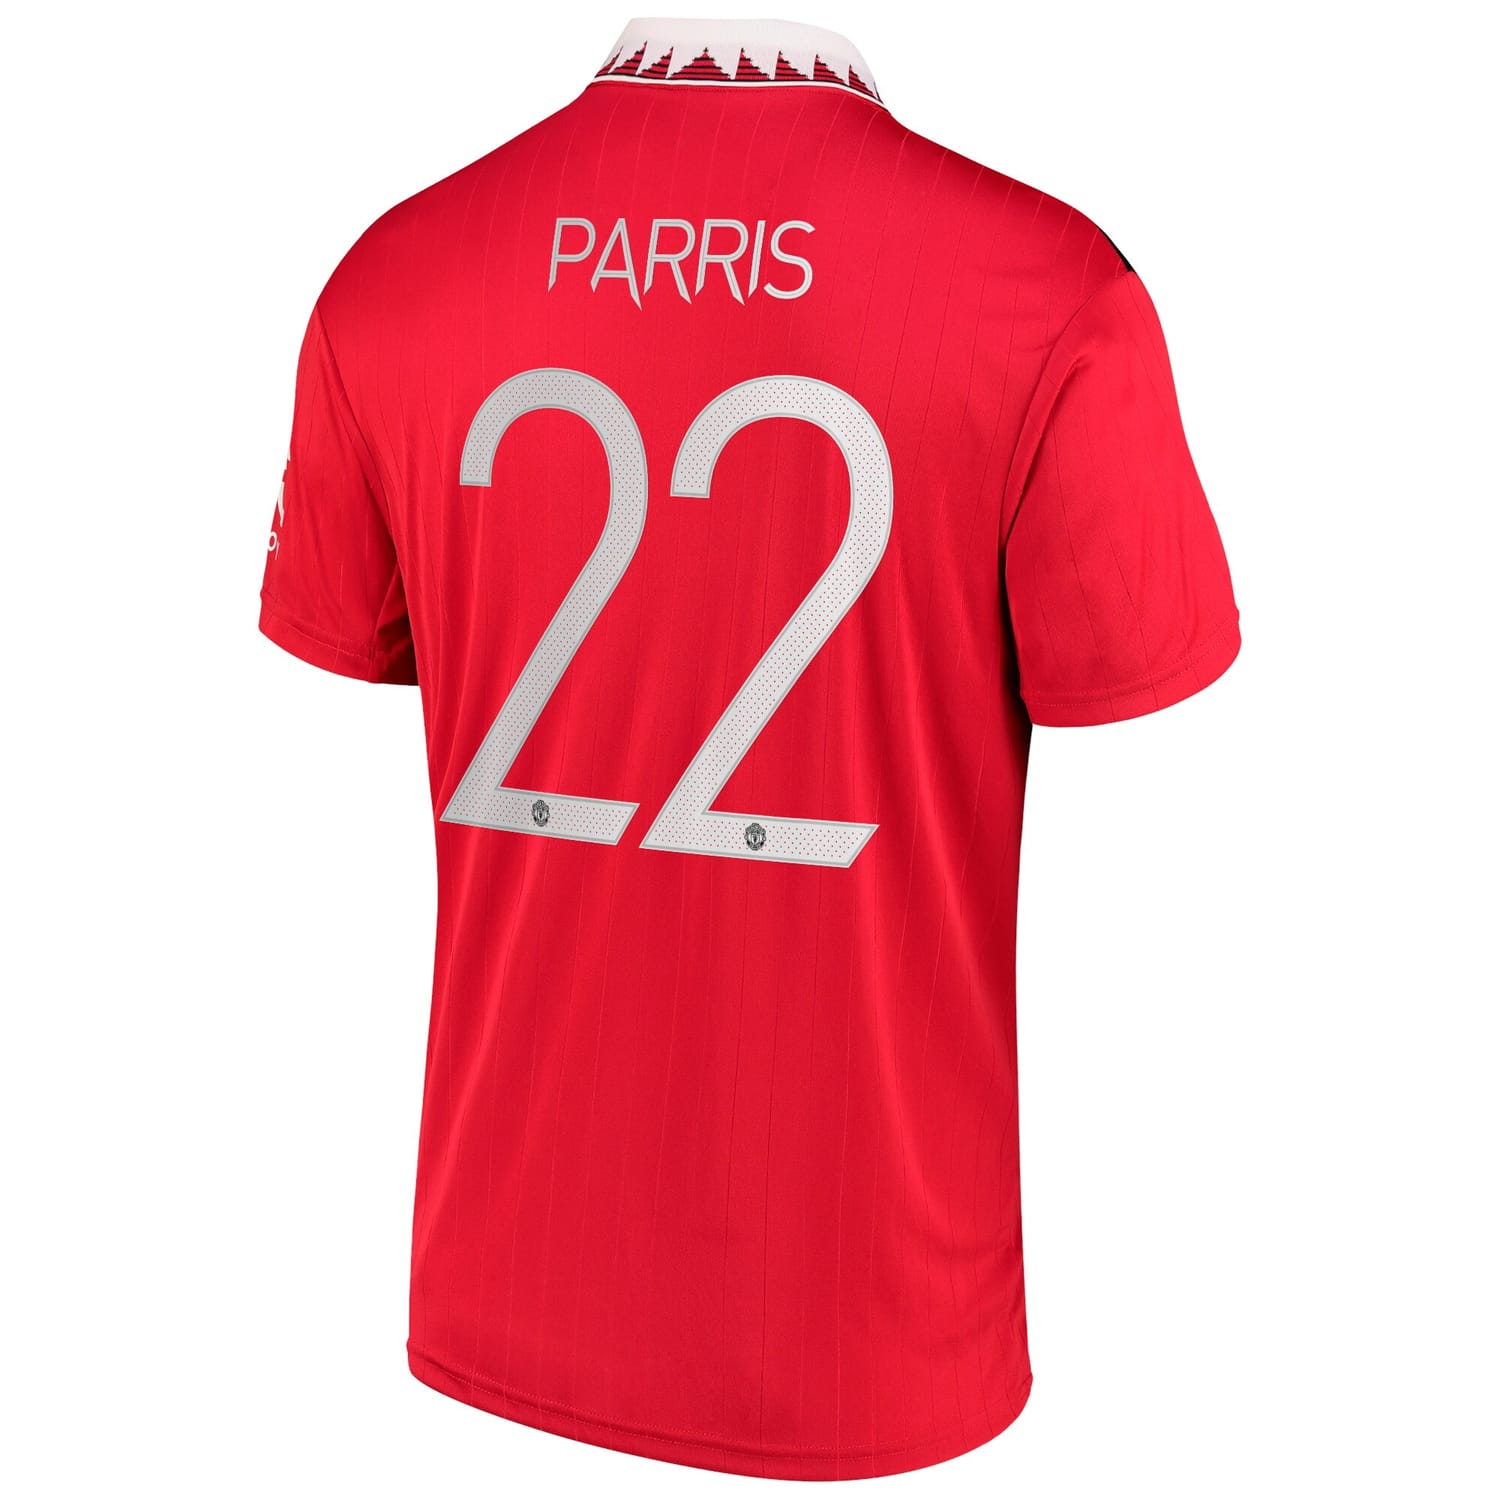 Premier League Manchester United Home Cup Jersey Shirt 2022-23 player Nikita Parris 22 printing for Men